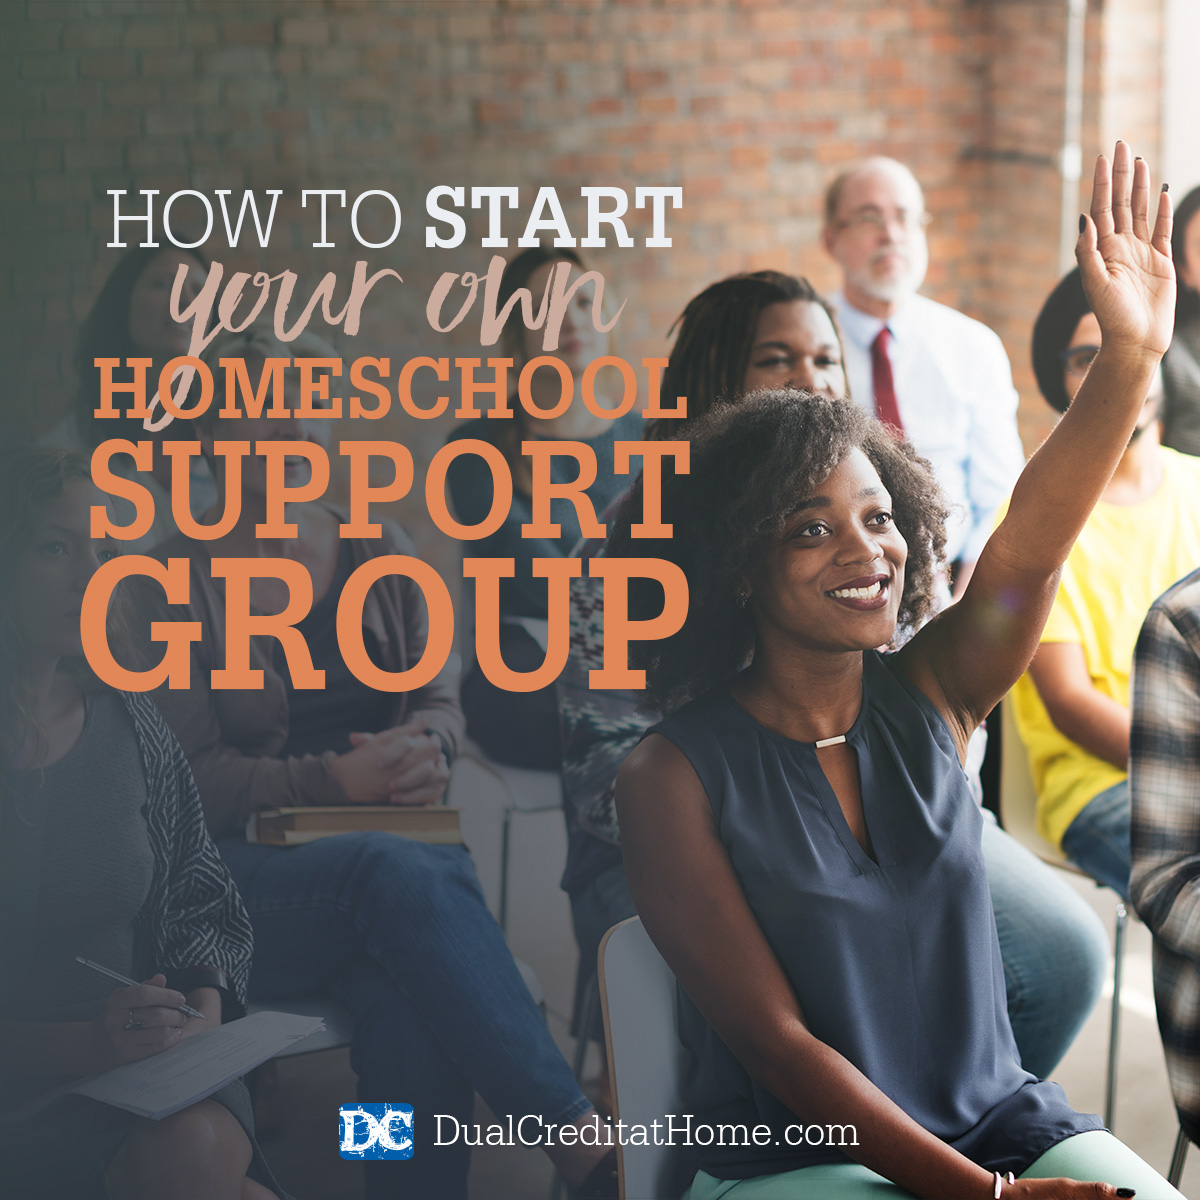 How to Start Your Own Homeschool Support Group